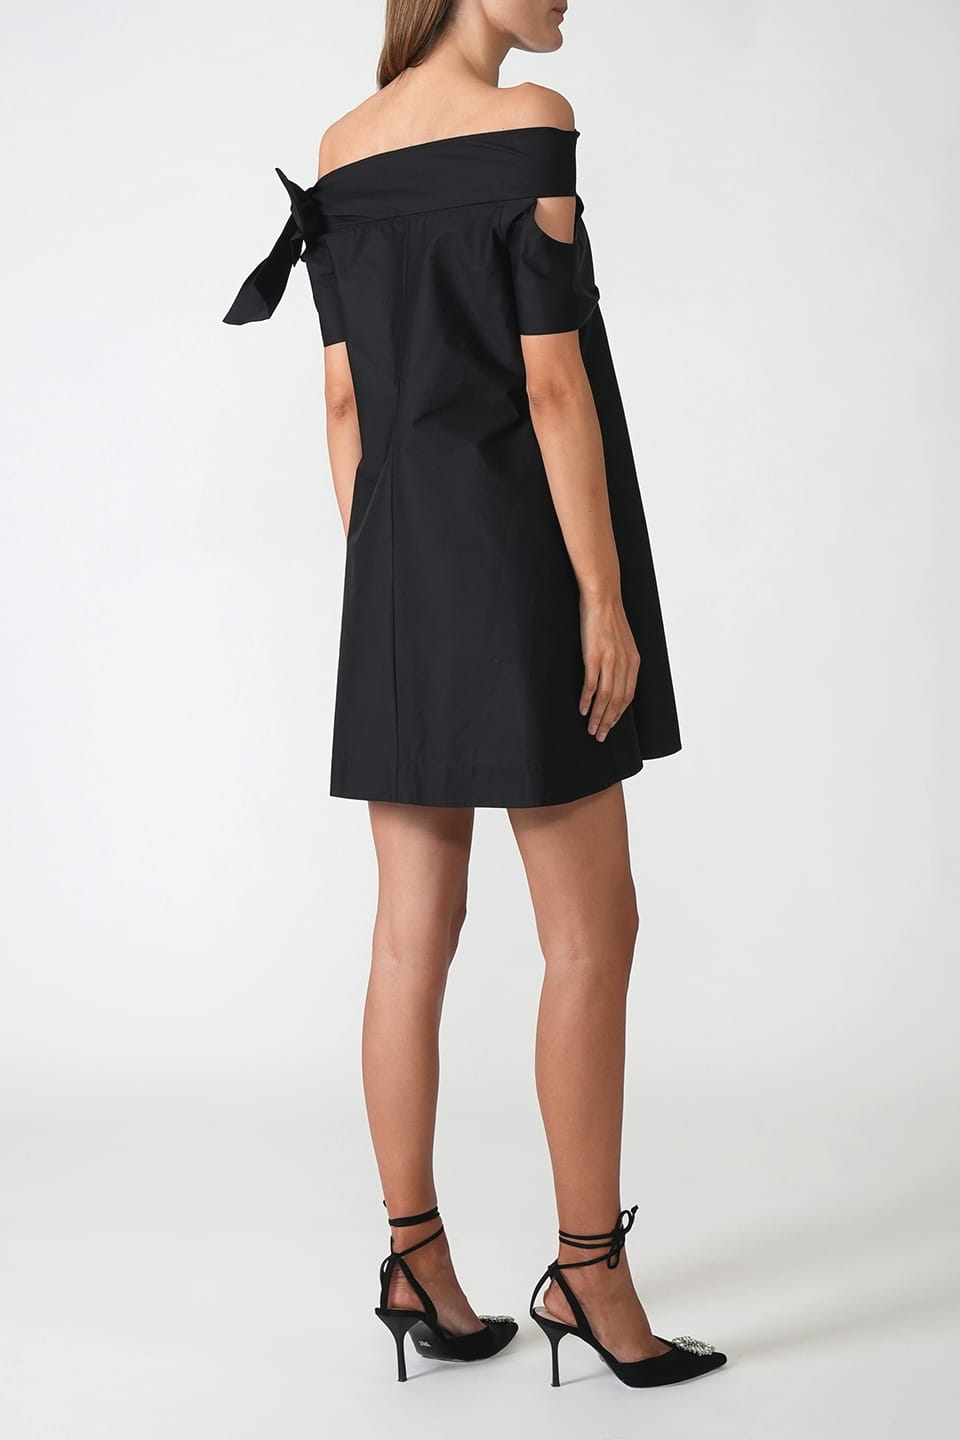 Designer Black Mini dresses, shop online with free delivery in UAE. Product gallery 7